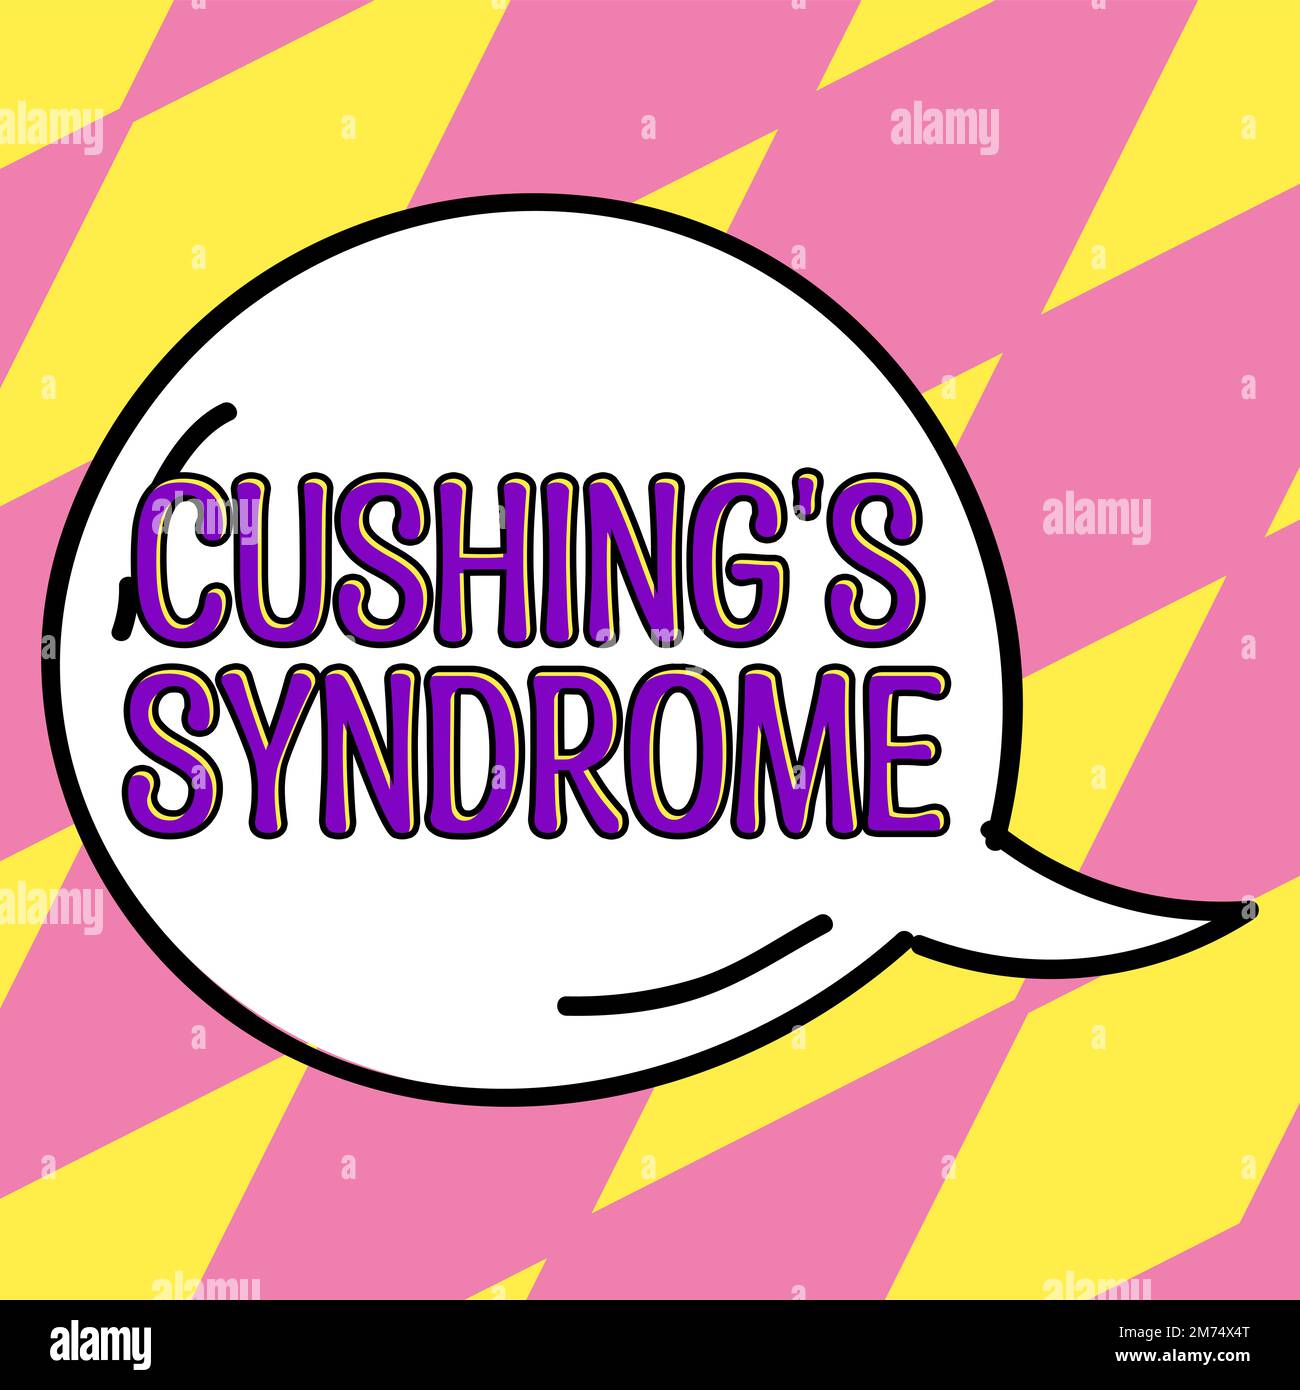 Text sign showing Cushing's Syndrome. Business showcase a disorder caused by corticosteroid hormone overproduction Stock Photo